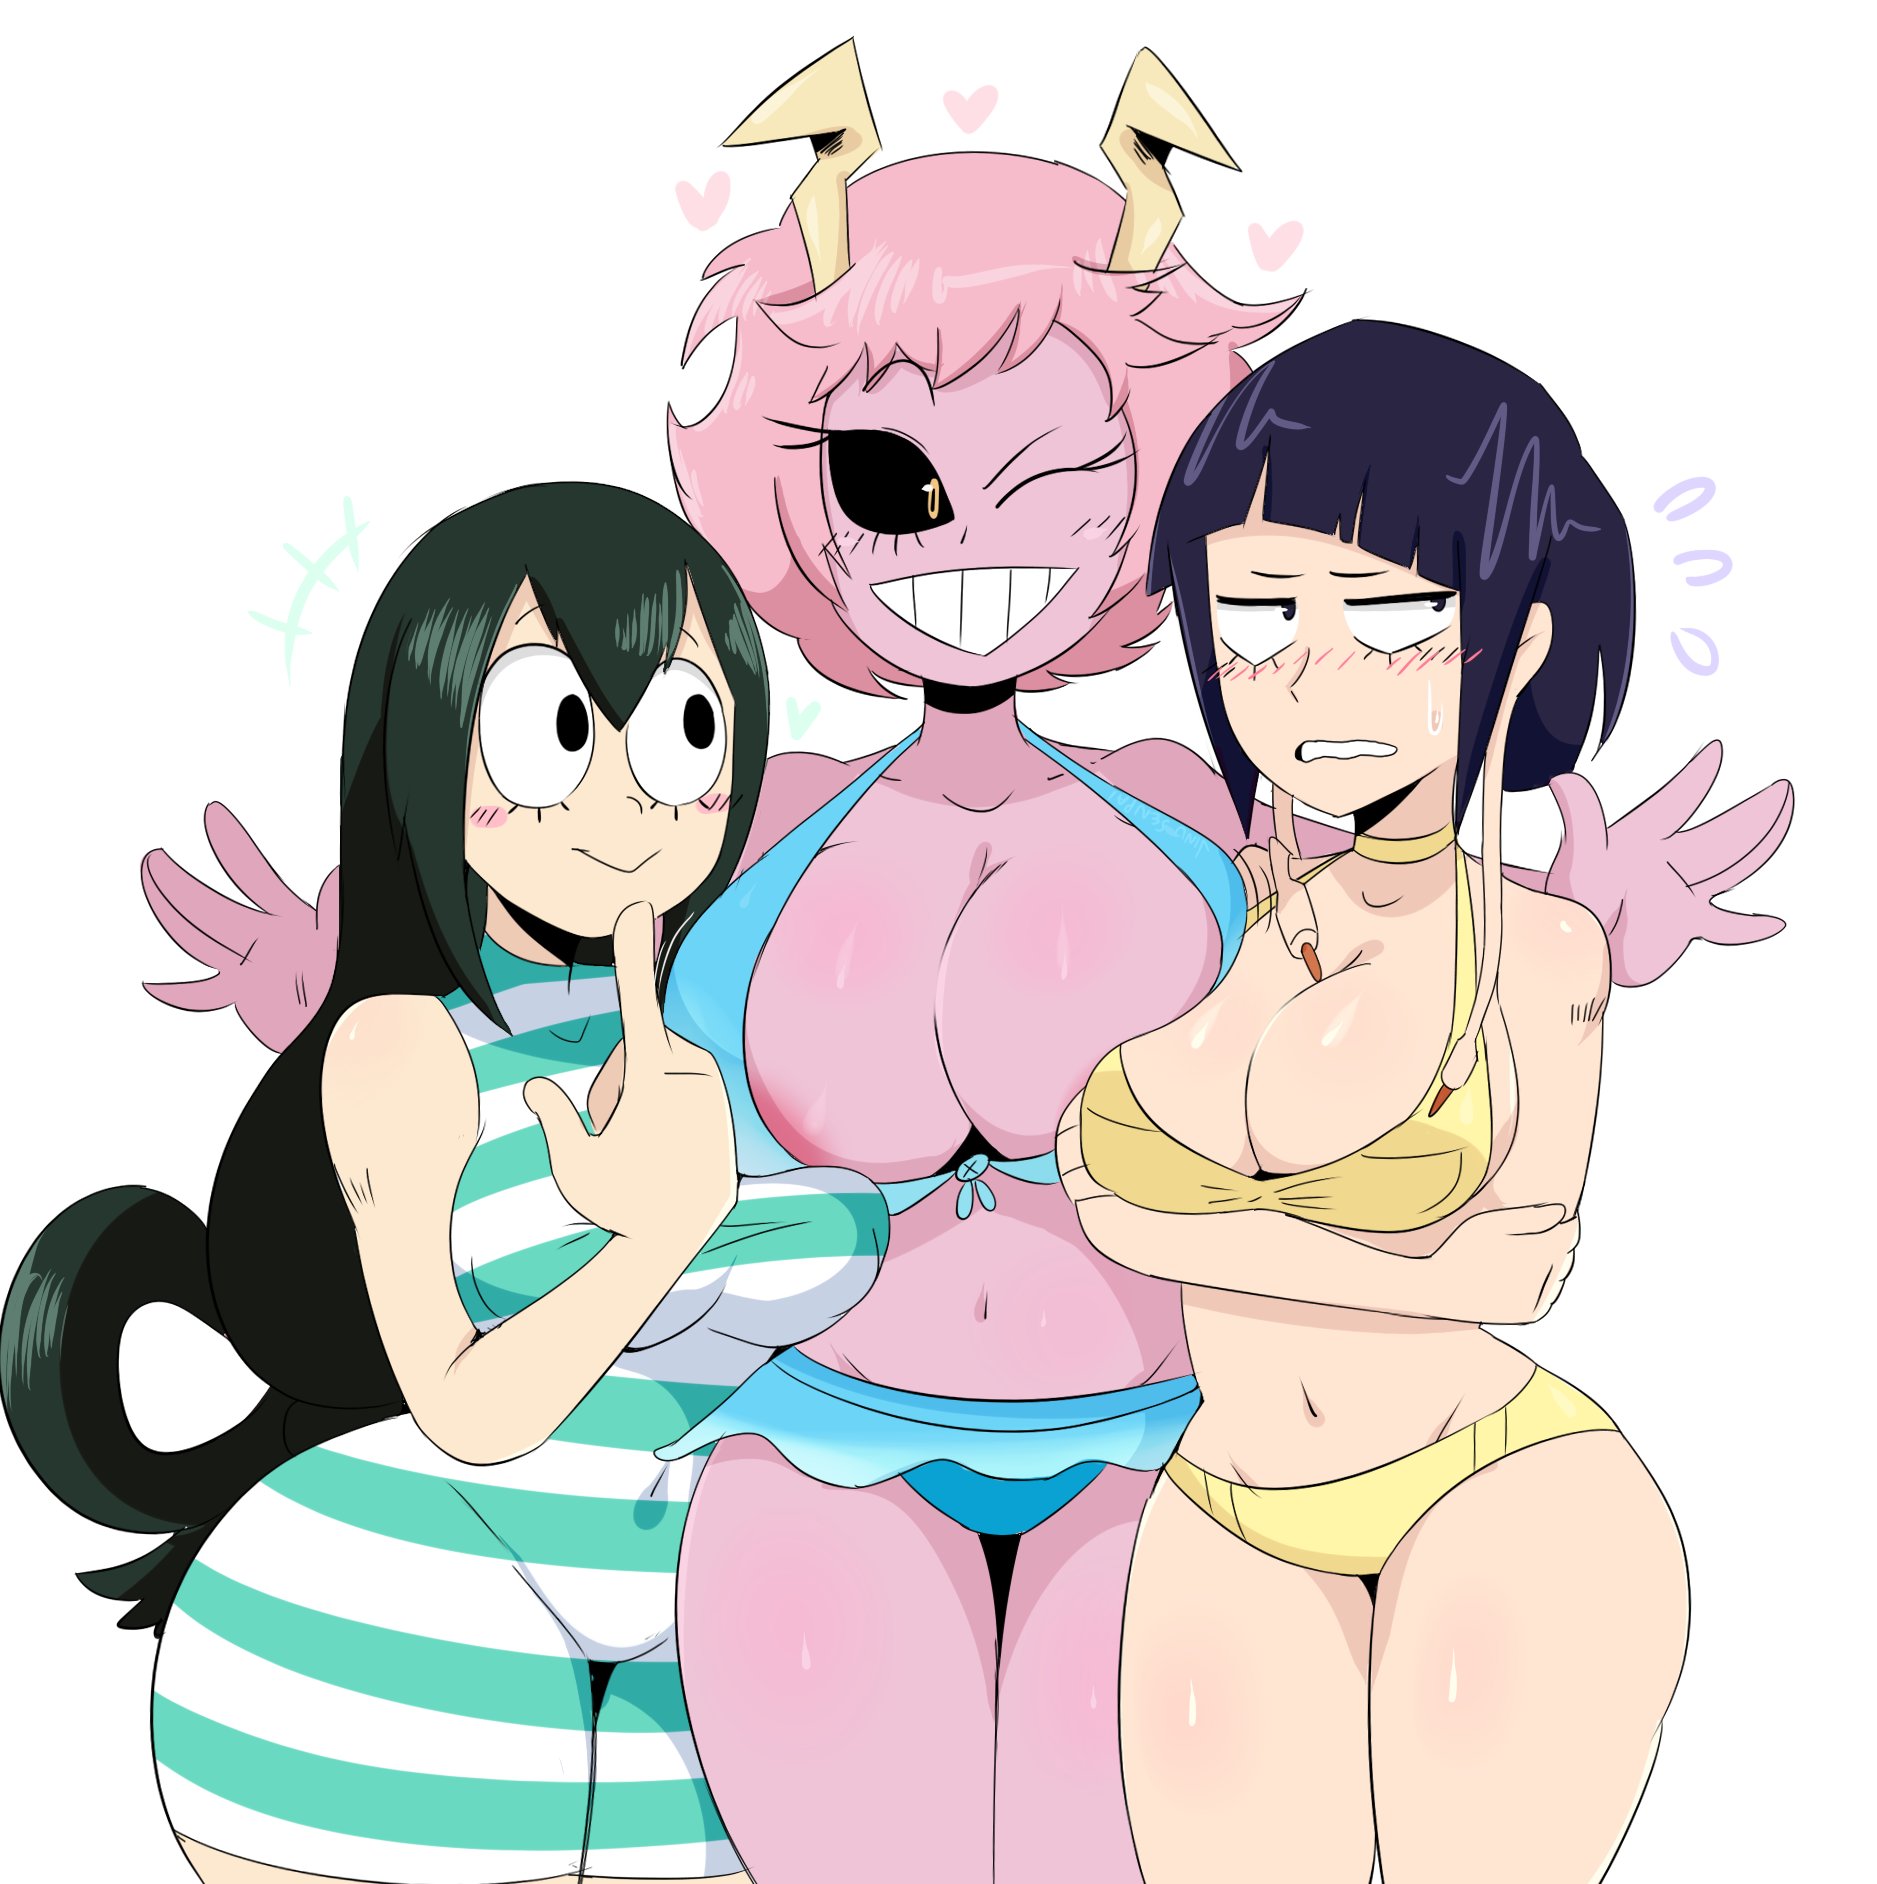 3 146. doodled Tsuyu, Mina and Jiro in some swimsuits! 